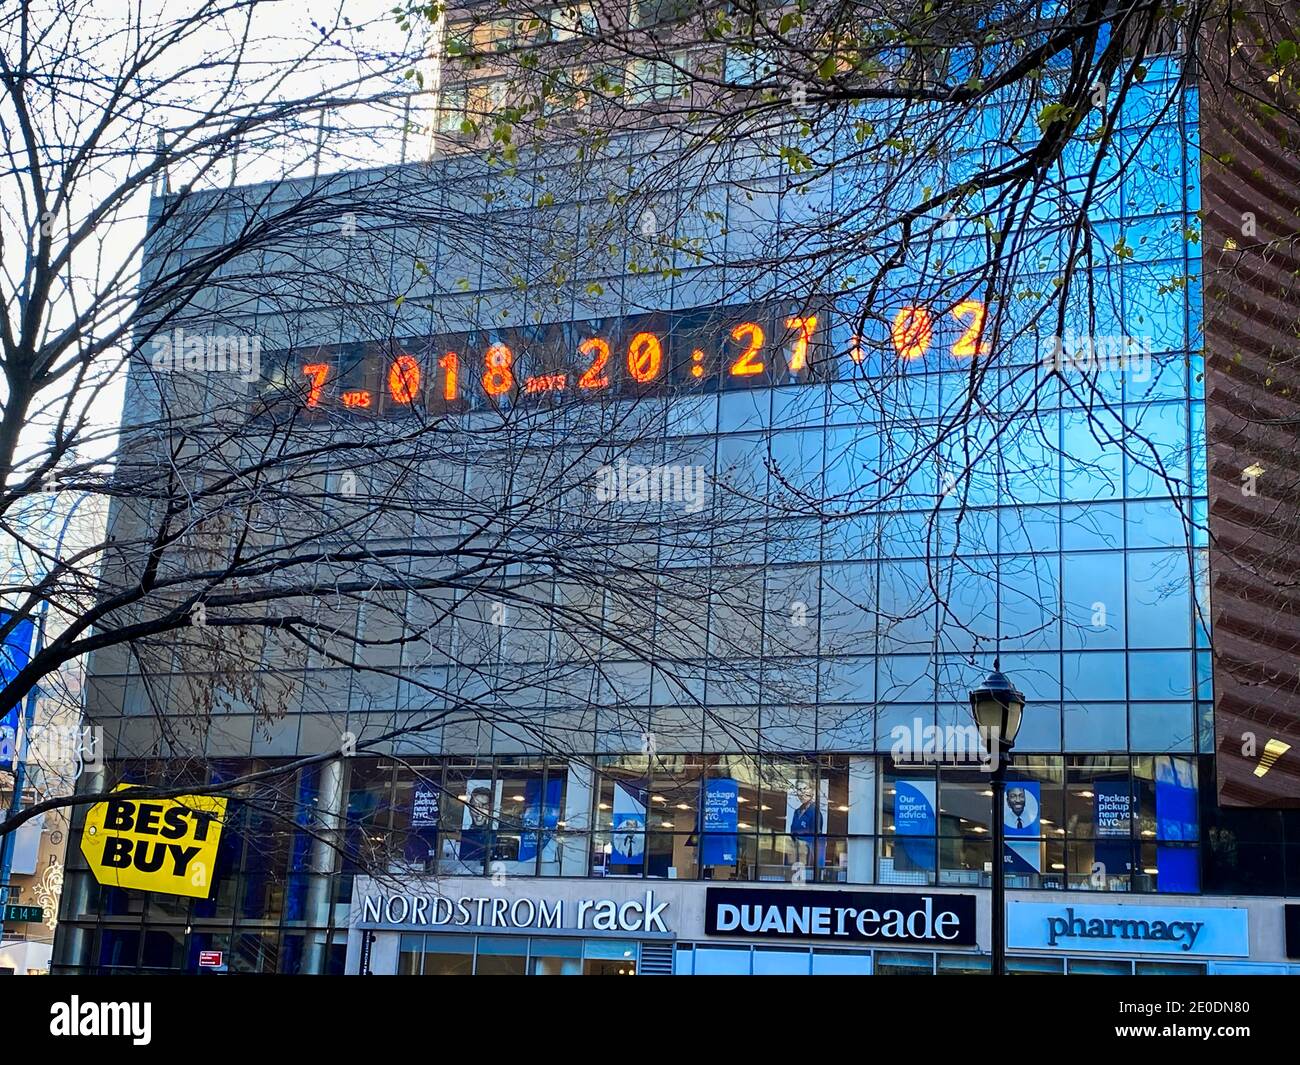 New York, NY, USA - Dec 31, 2020: Union Square time clock indicating time left before global warming cannot be reversed Stock Photo